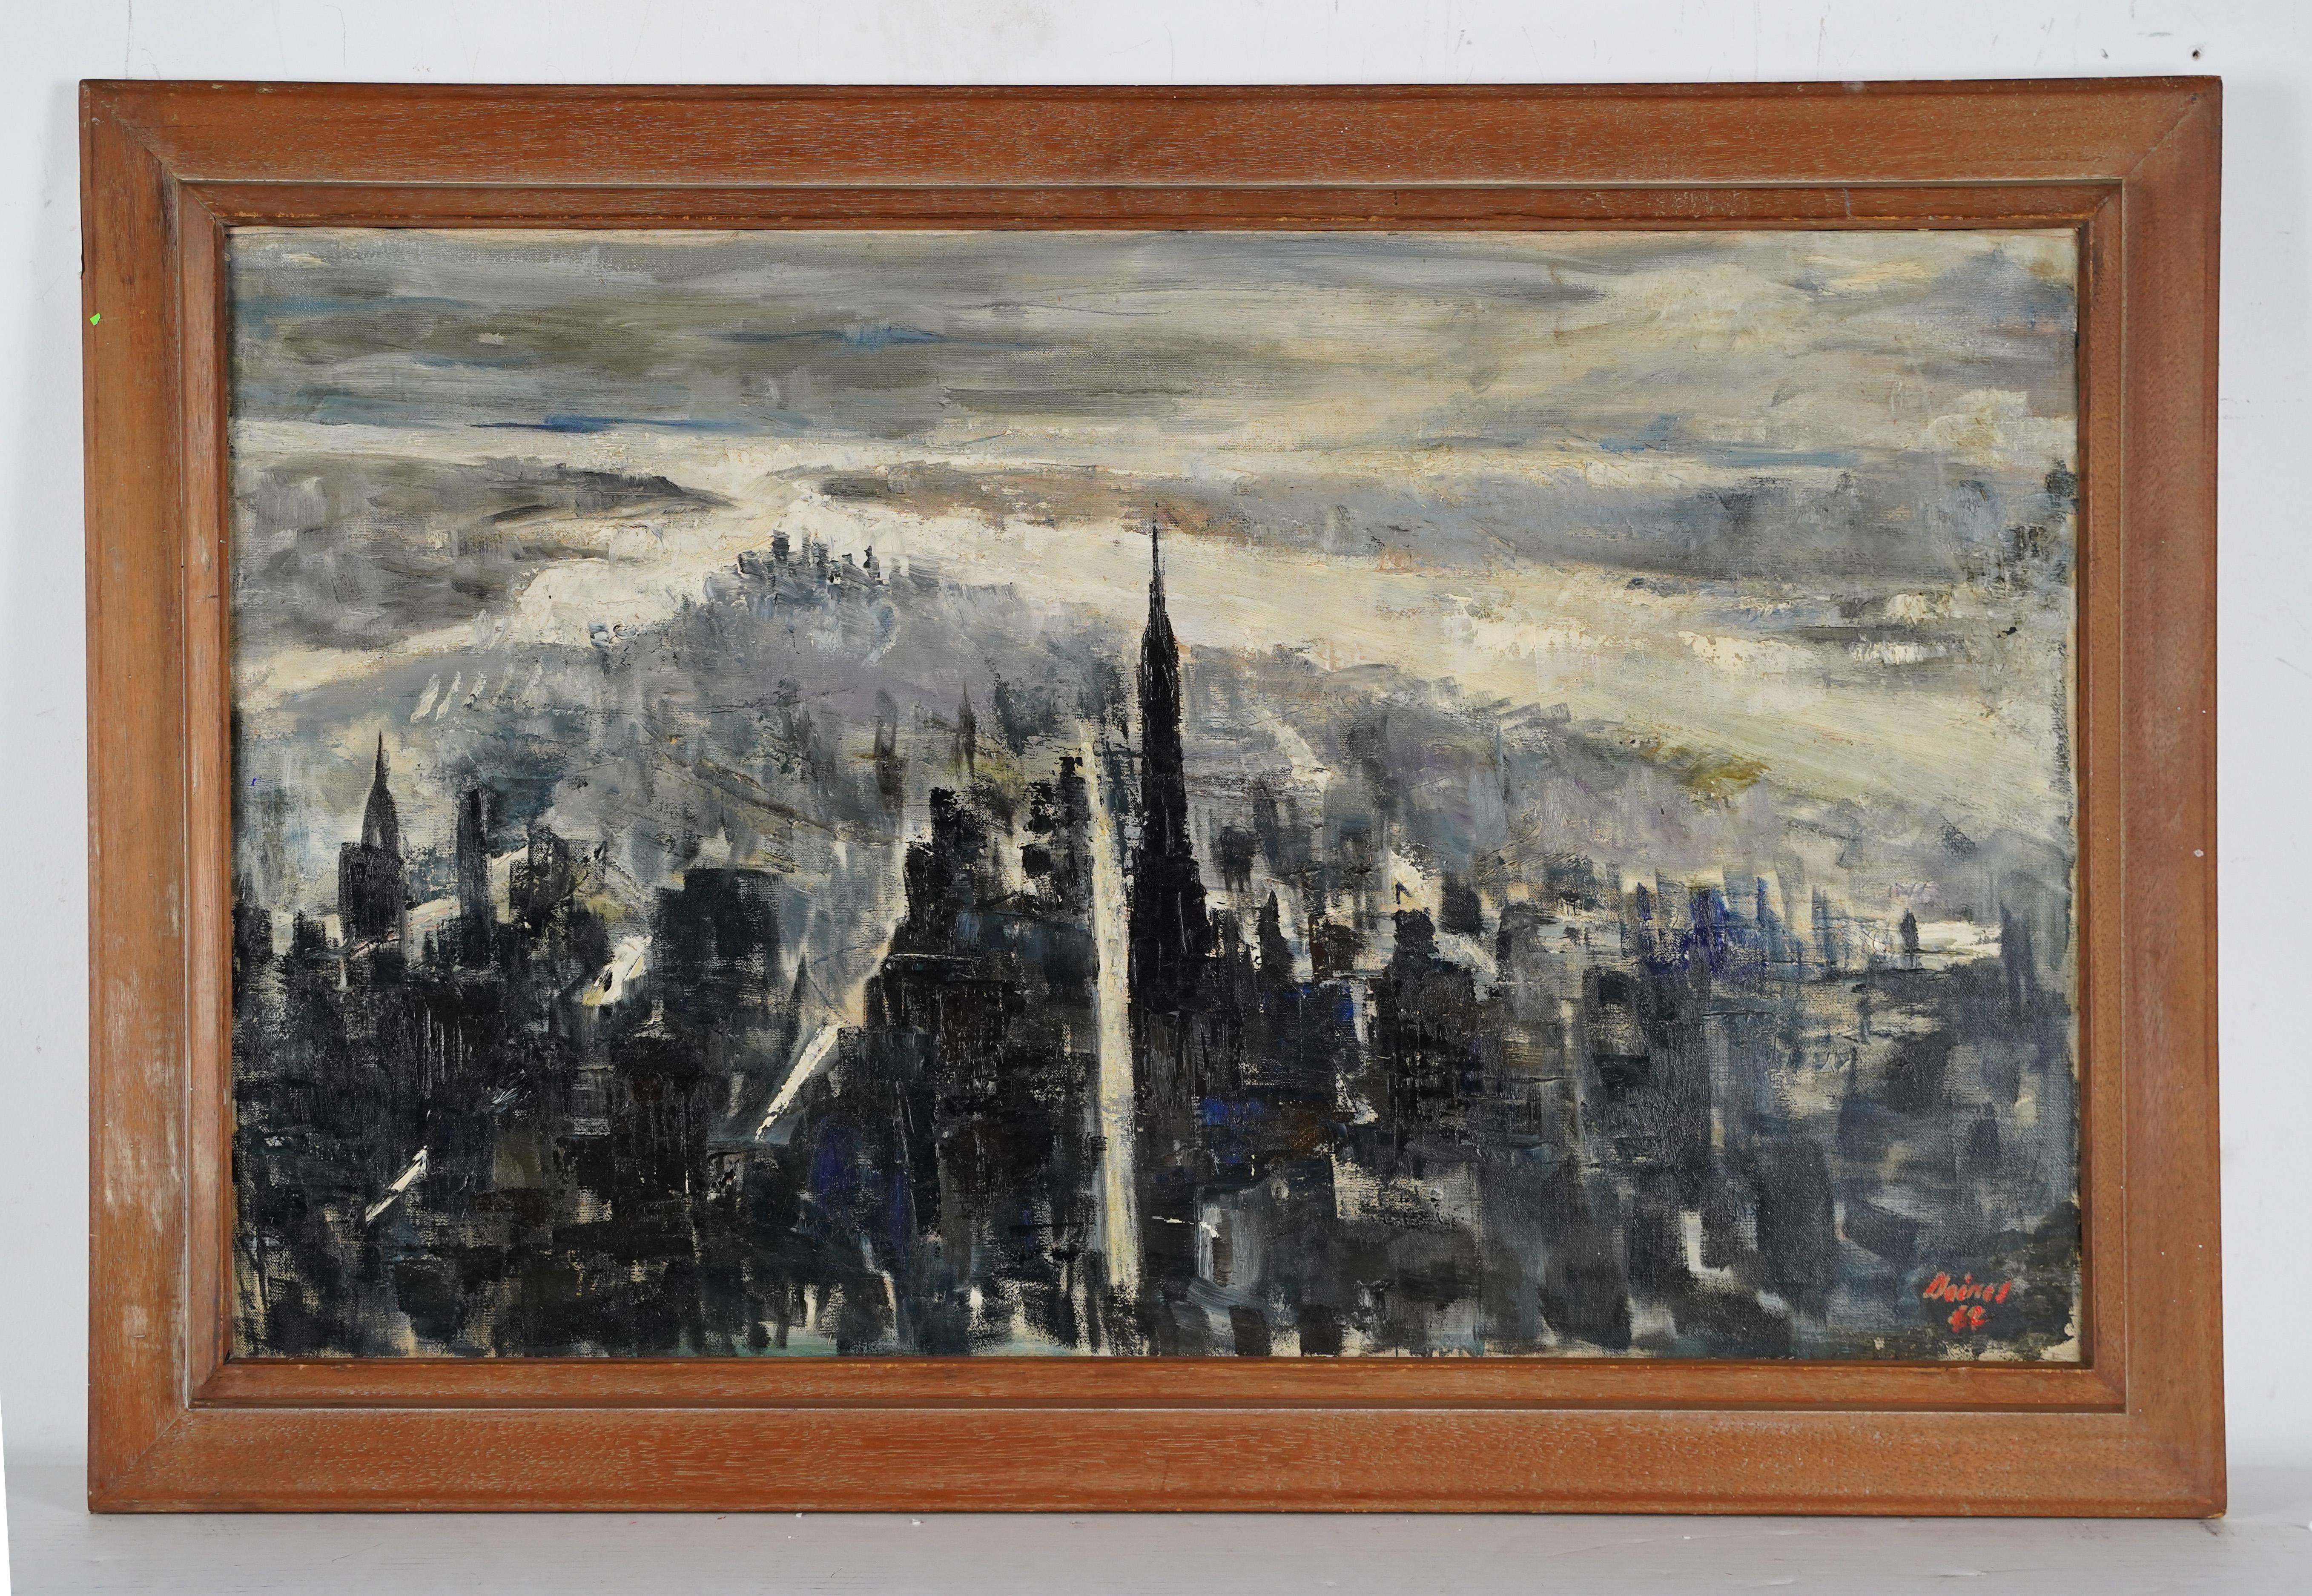 Antique American modernist painting of New York City.  Oil on canvas, circa 1947.  Signed.  Image size 34L x 20H.  Housed in a period modern frame.